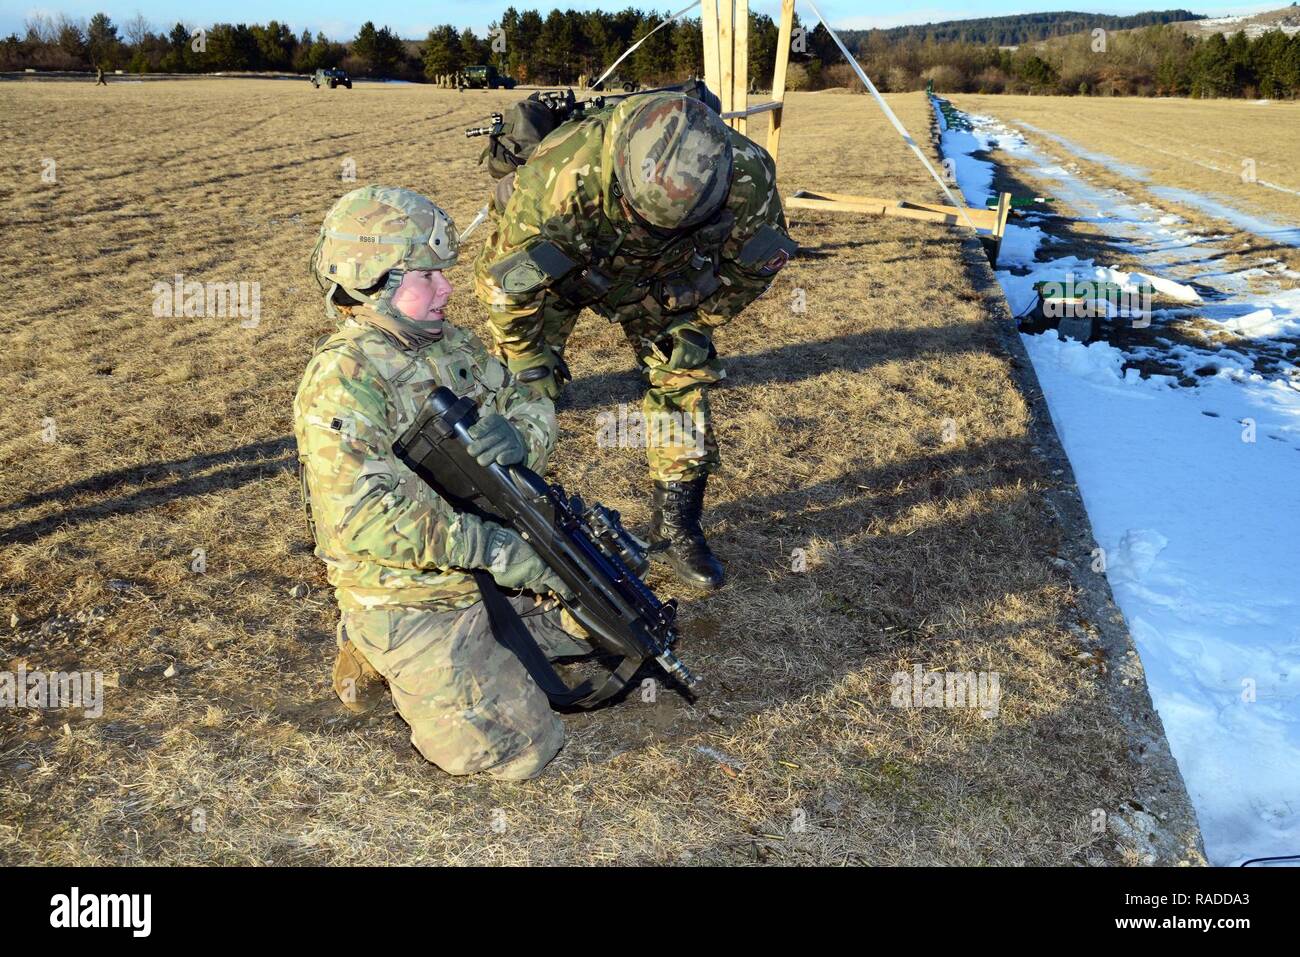 U.S. Army paratroopers from the 173rd Brigade Support Battalion, 173rd Airborne Brigade and Slovenian soldiers cross-train on the M4 carbine rifles and FN F2000 assault rifles during exercise Lipizzaner III in Bac, Slovenia, on Jan. 26, 2017. Lipizzaner is a combined squad-level training exercise in preparation for platoon evaluation, and to validate battalion-level deployment procedures. Stock Photo